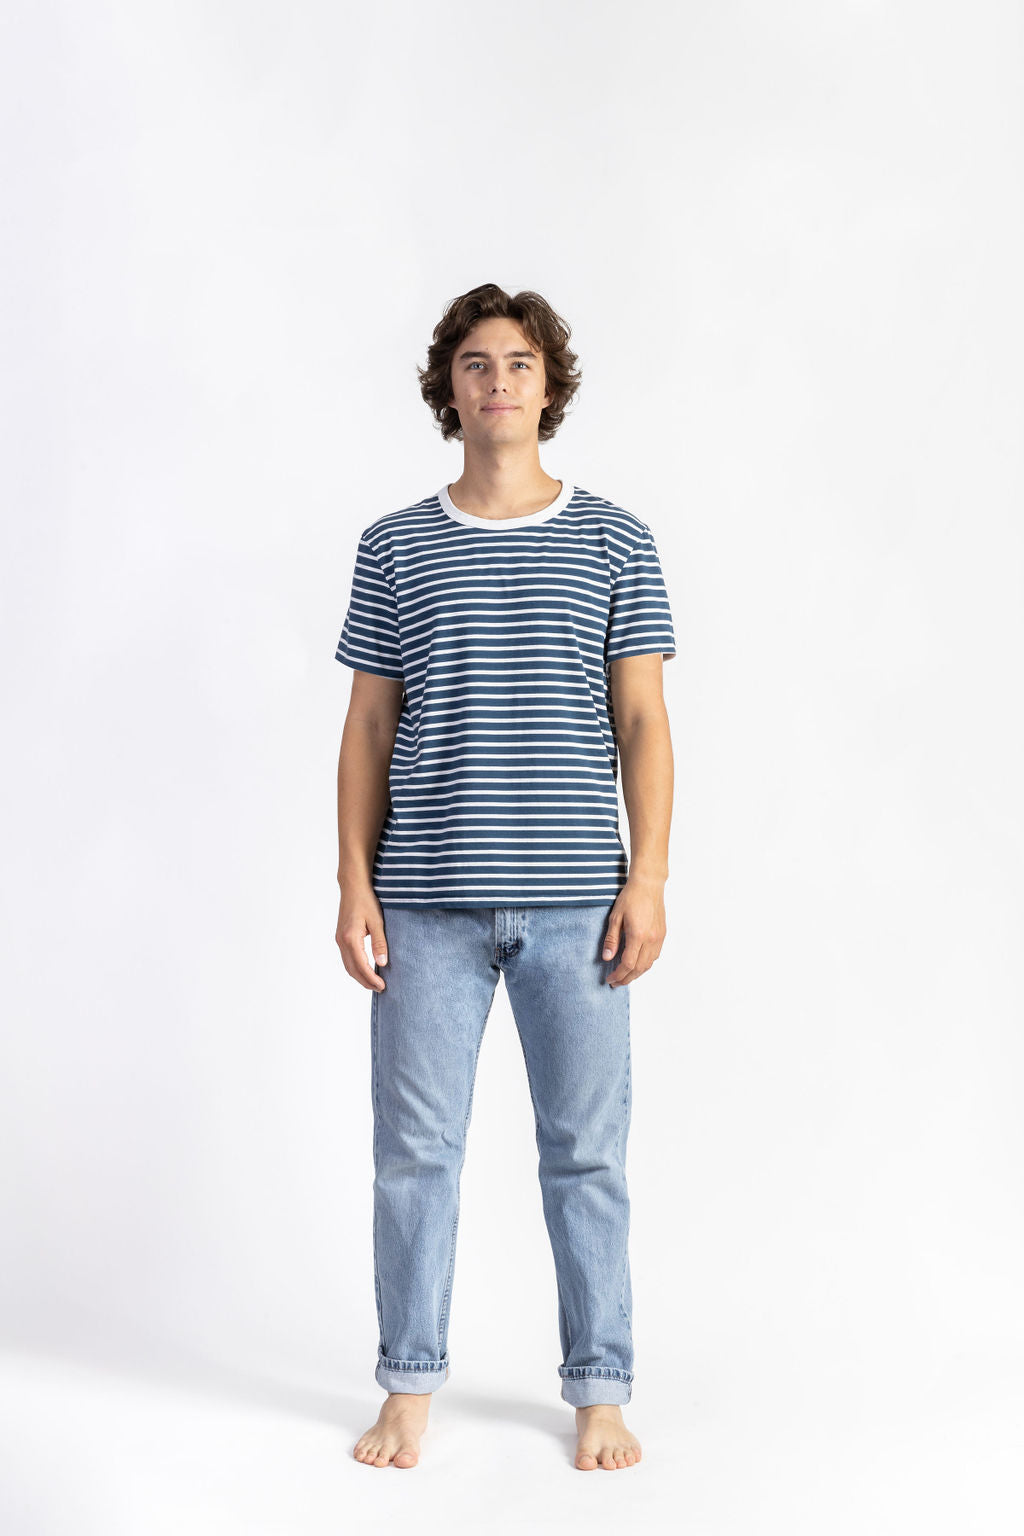 A man wearing a Blue/White Striped Tee Shirt with light blue jeans